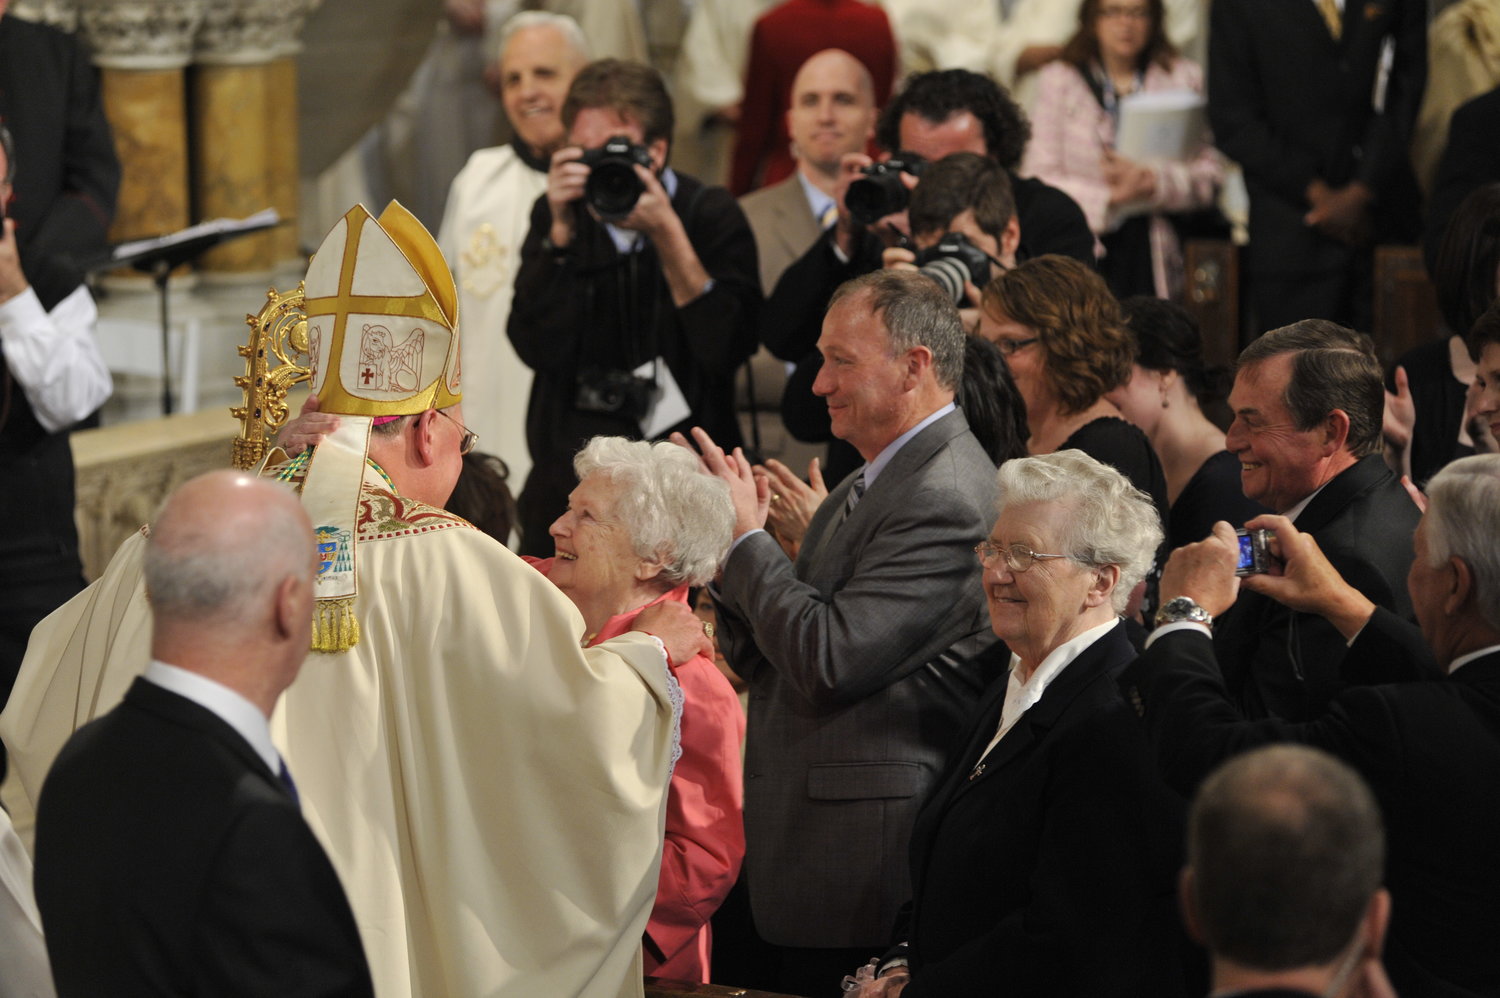 Then-Archbishop Timothy M. Dolan greets his proud mother, Shirley Dolan, at the beginning of his Installation Mass as Archbishop of New York April 15, 2009 at St. Patrick's Cathedral.